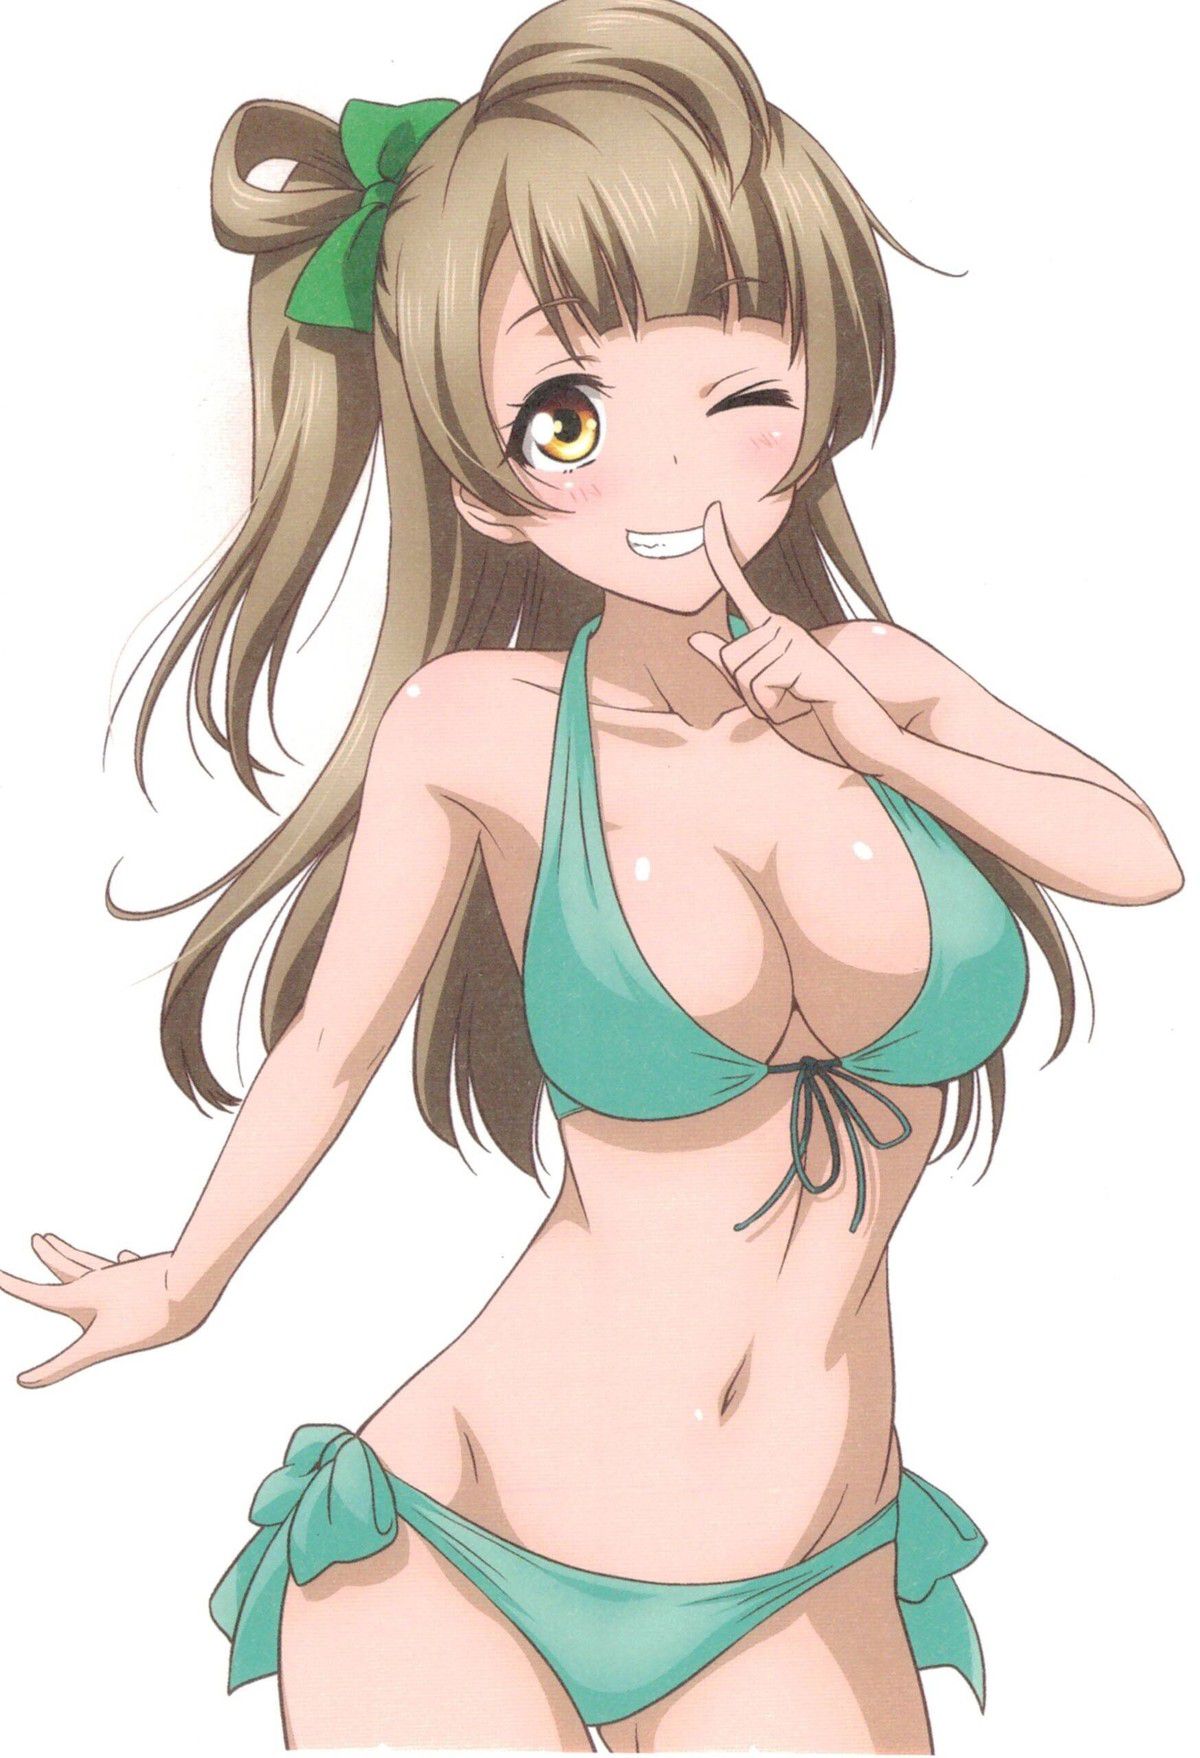 [Image] "love live! ' Big Totoro kotori-Chan and I ○ want erotic too awesome. wwwww 6